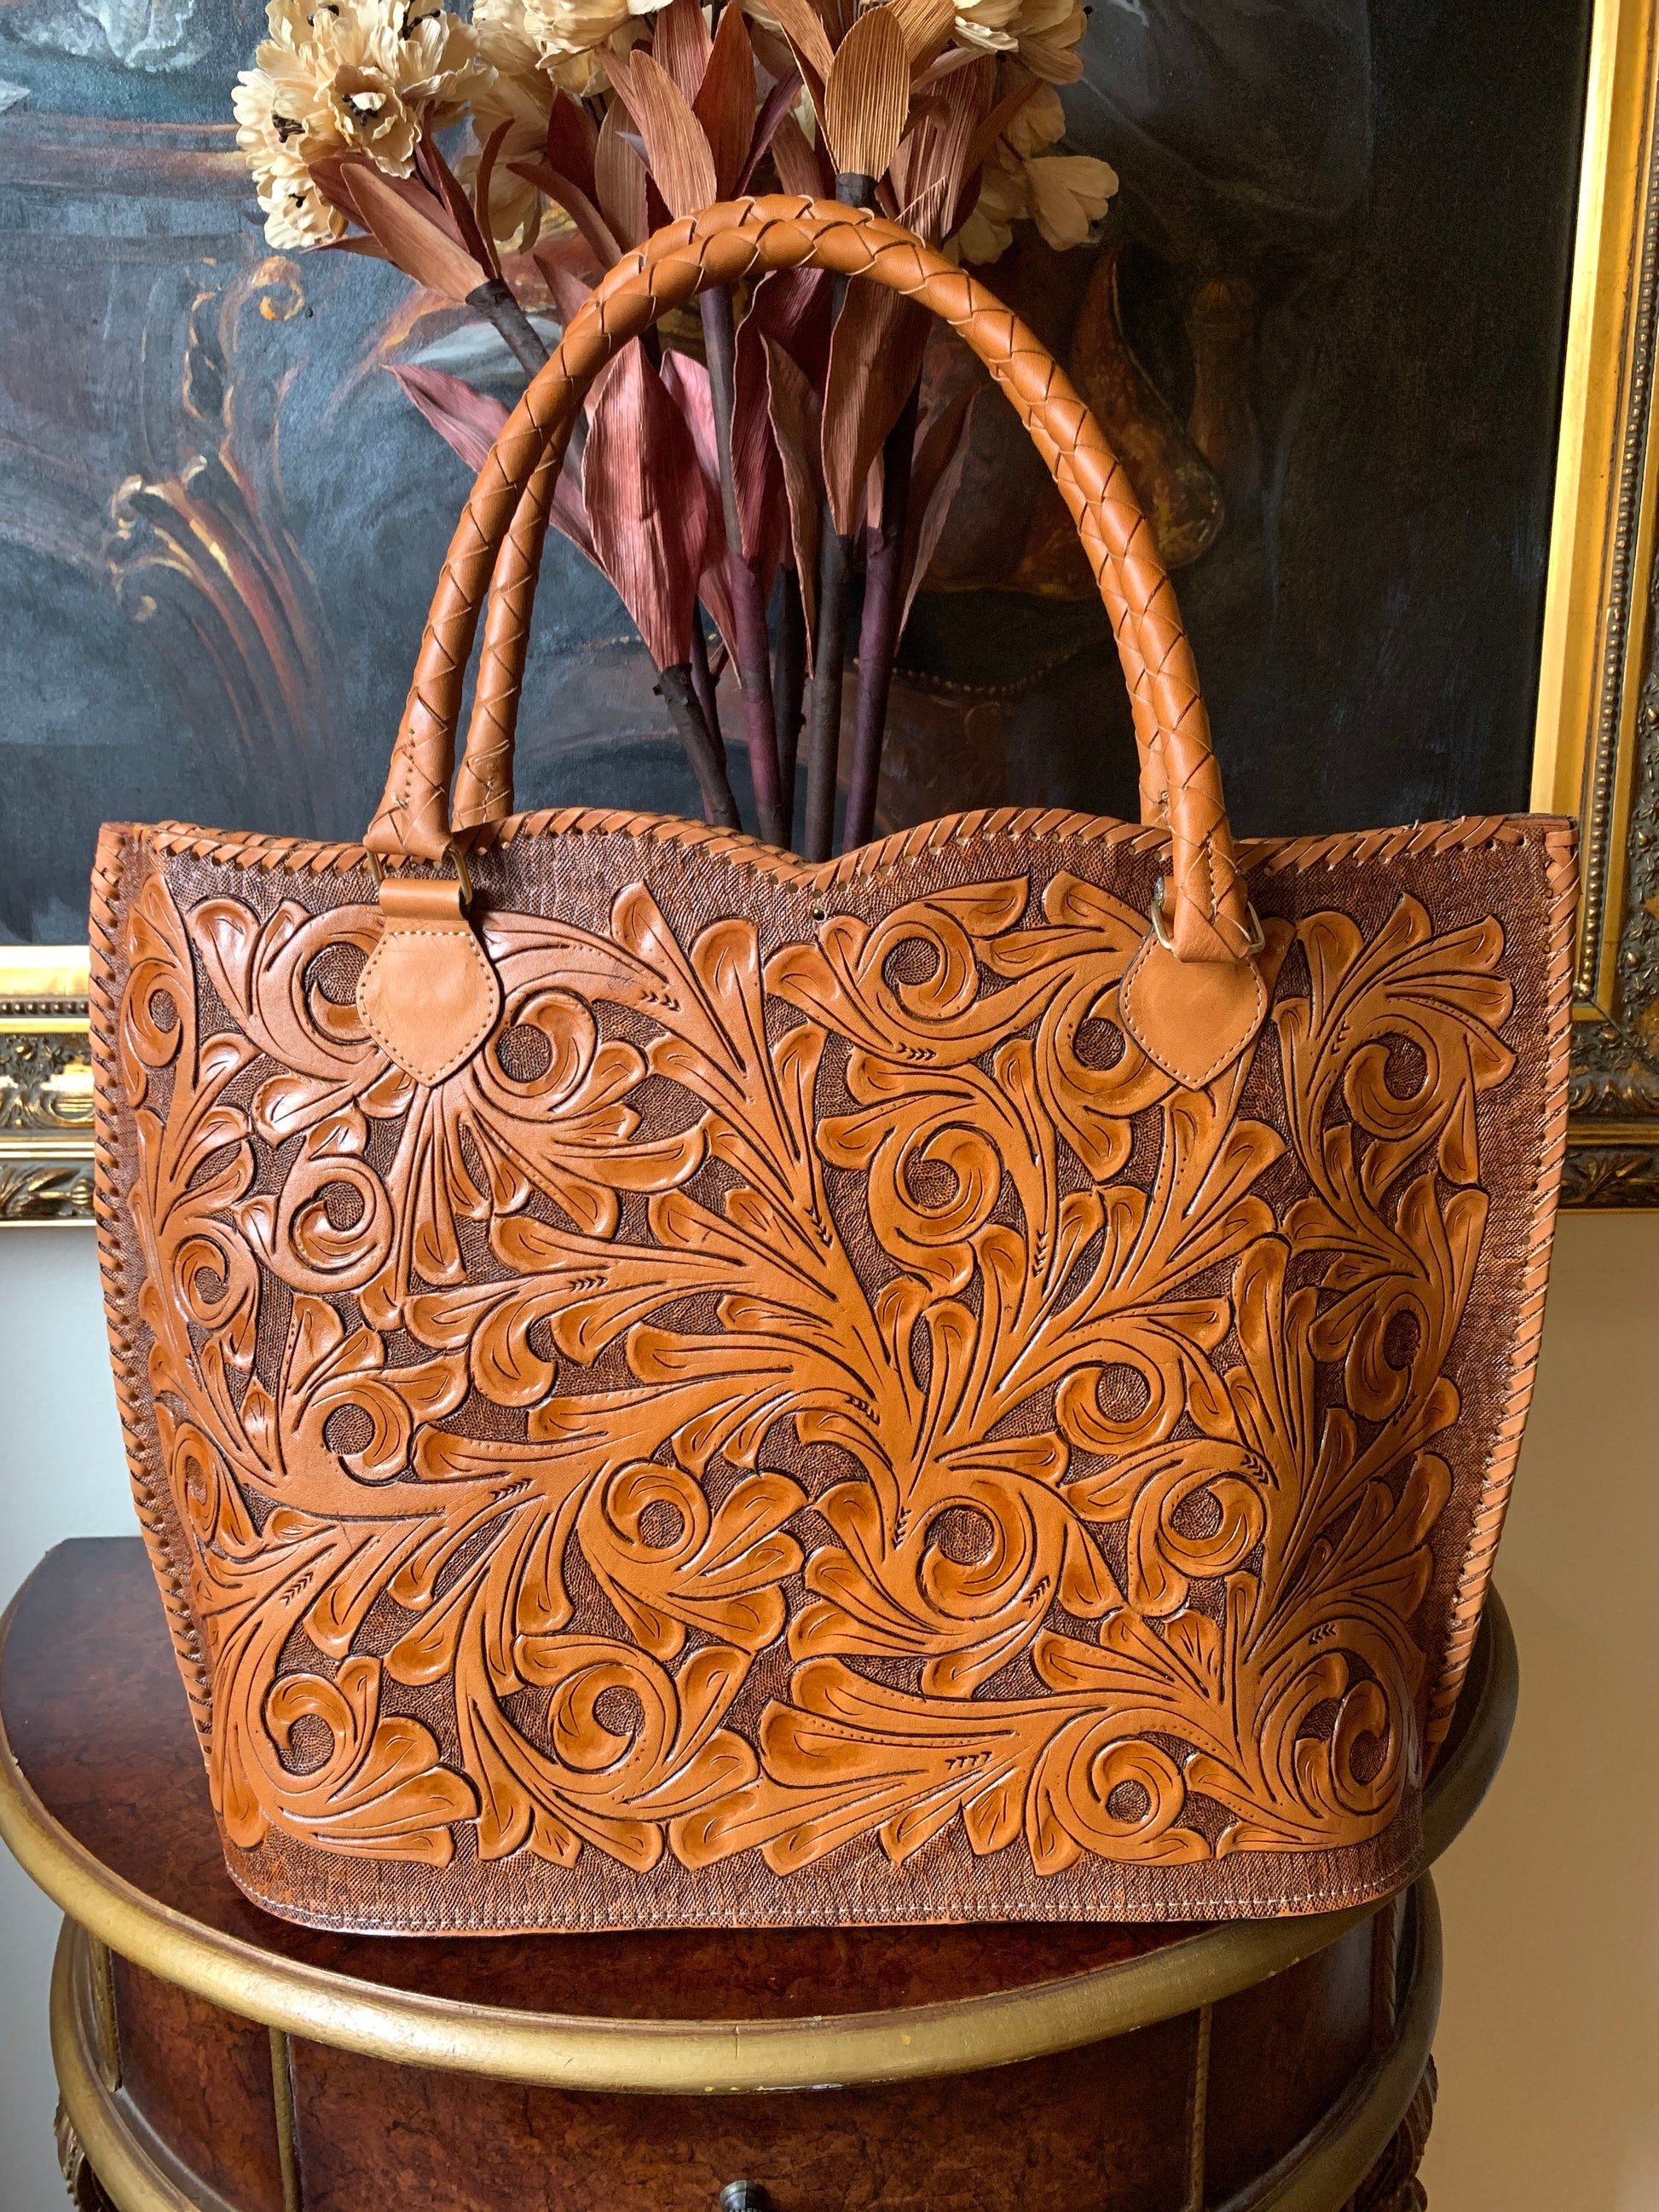 Hand Tooled LeatherTote, "Ibiza" by ALLE, Honey Color, Western Style - ALLE Handbags